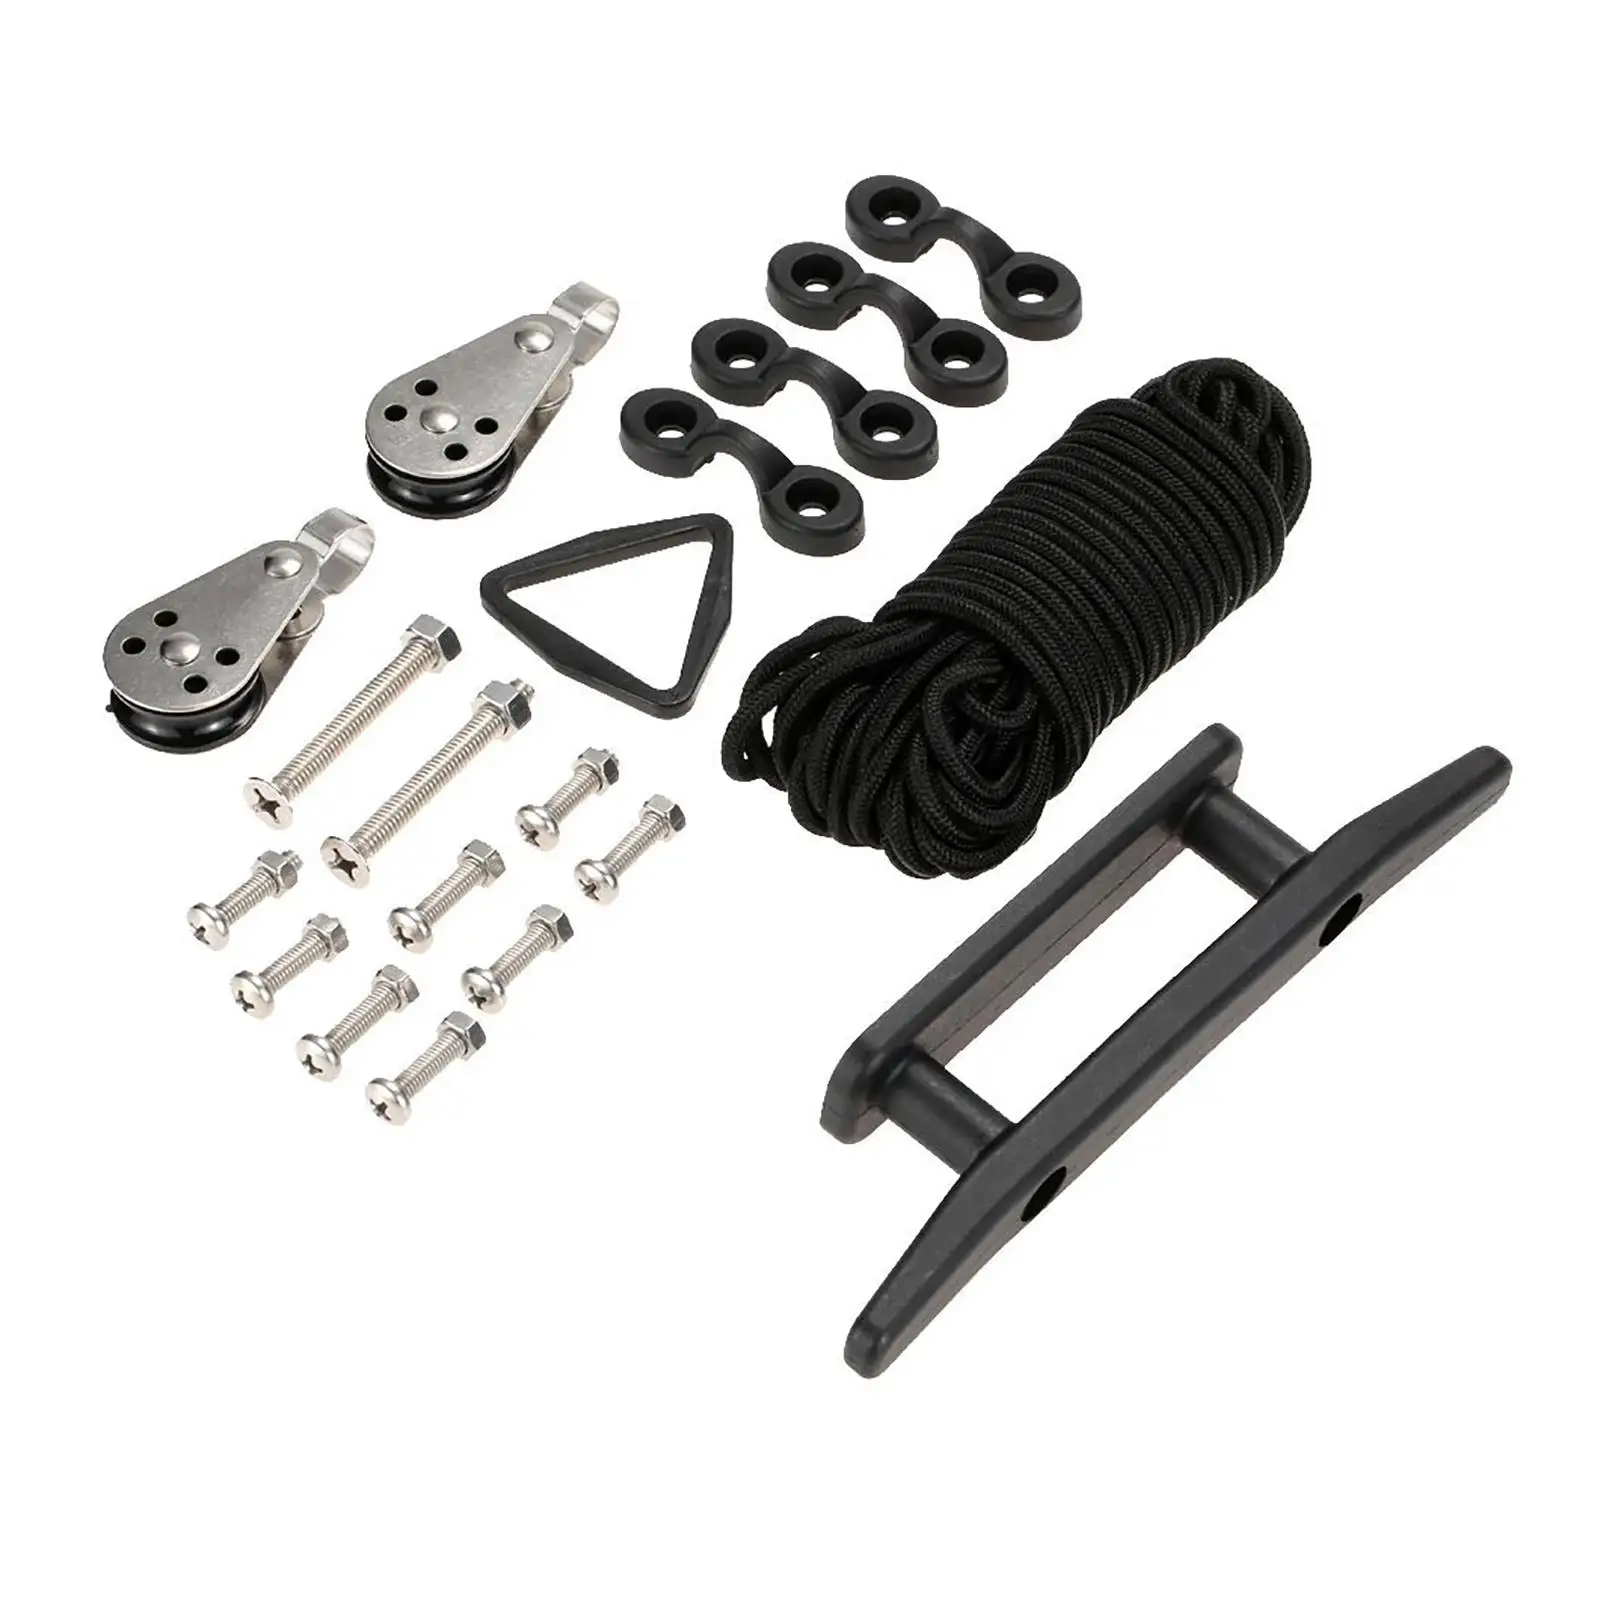 Kayak Canoe Boat Anchor Trolley Kit with Rope, Pulleys, Stainless Steel 316 Hardware Cleats, Pad Eyes, Rings